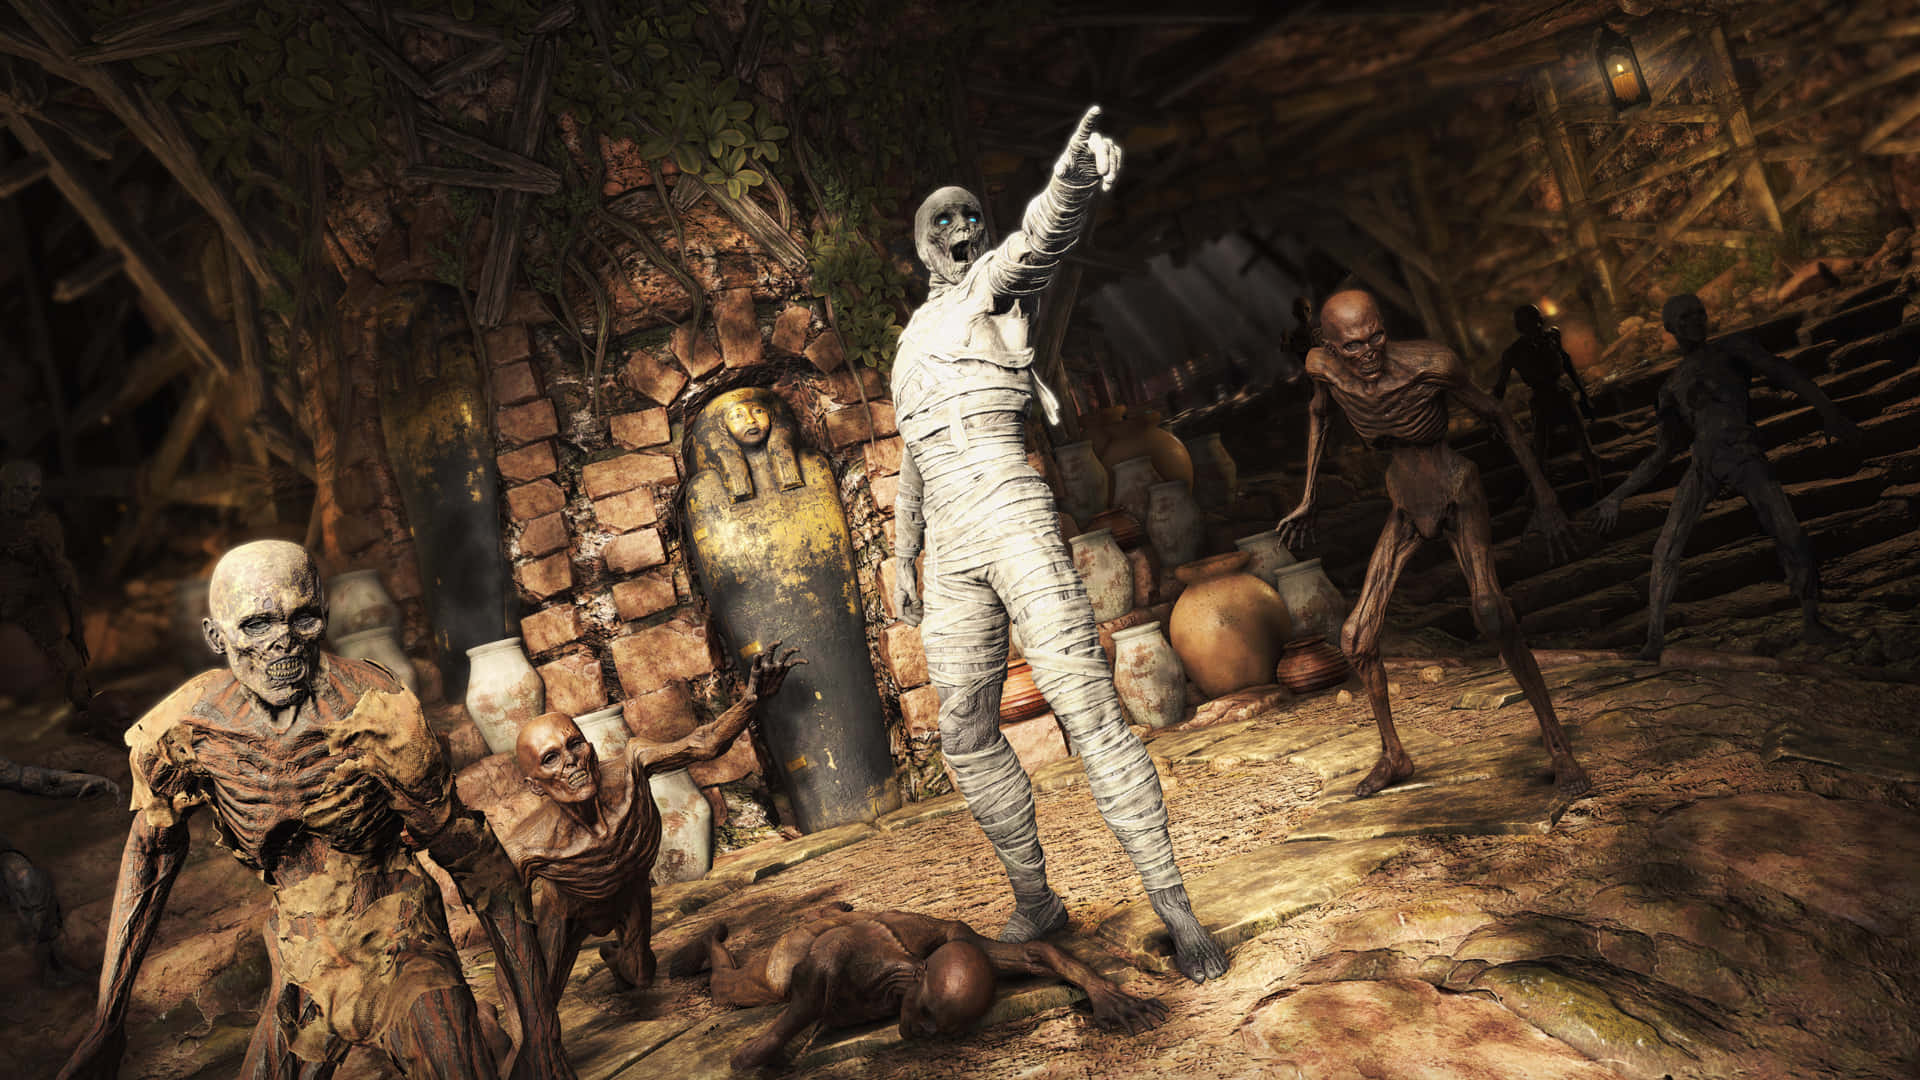 Play Strange Brigade and join the fight against myths and legends